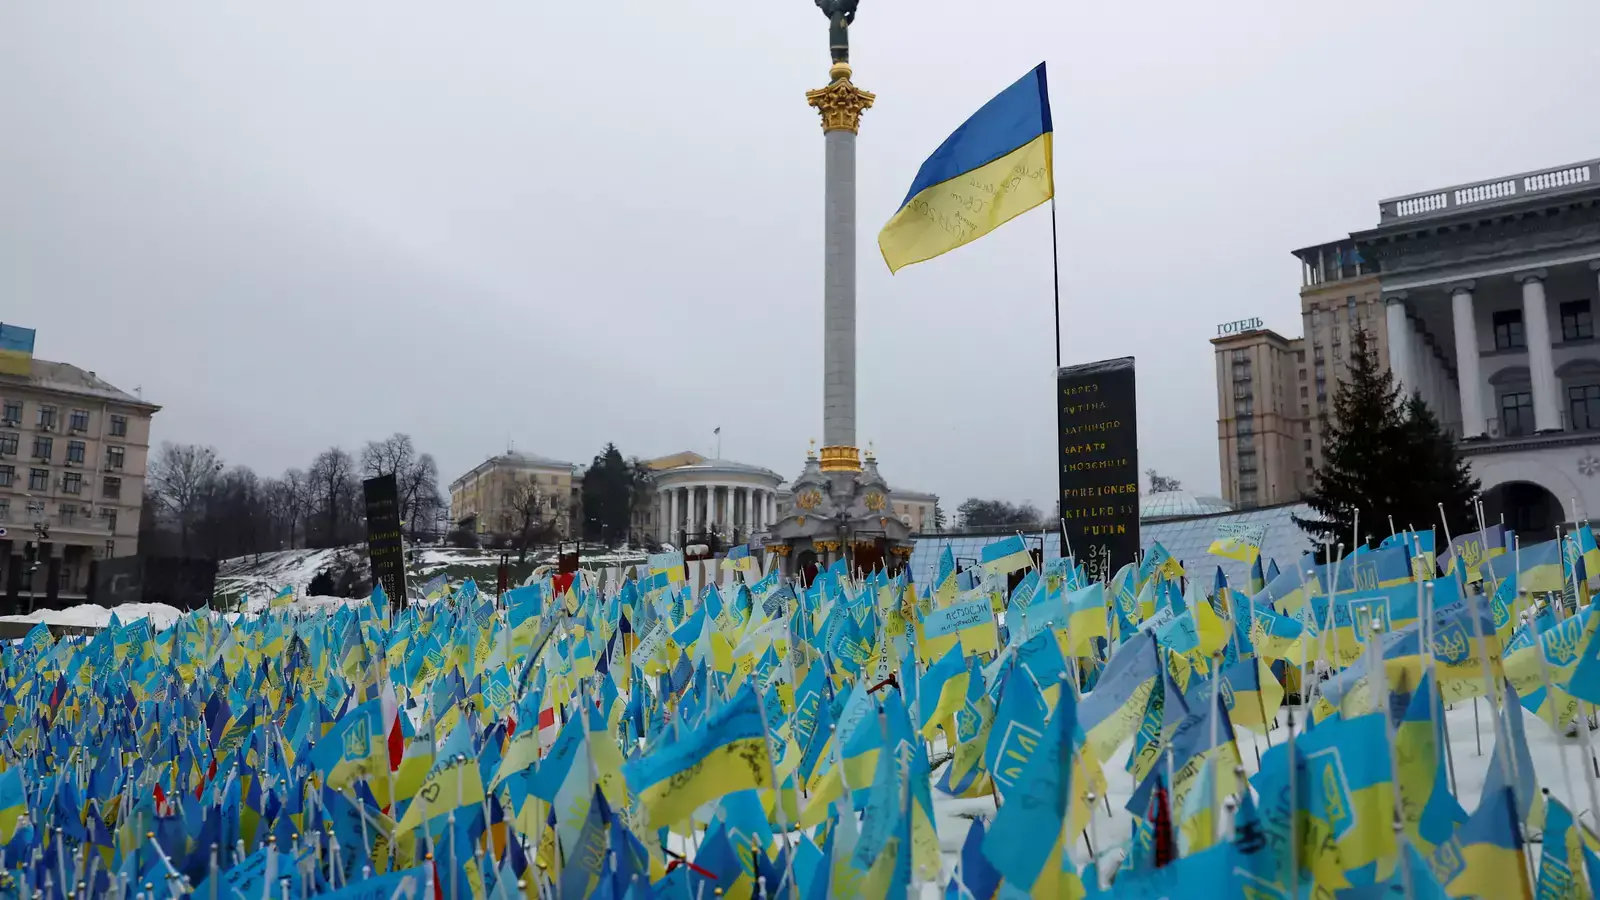 Flags representing fallen soldiers are seen in the snow on Independence Square, as Russia's attack on Ukraine continues, in Kyiv, Ukraine on December 22, 2022.